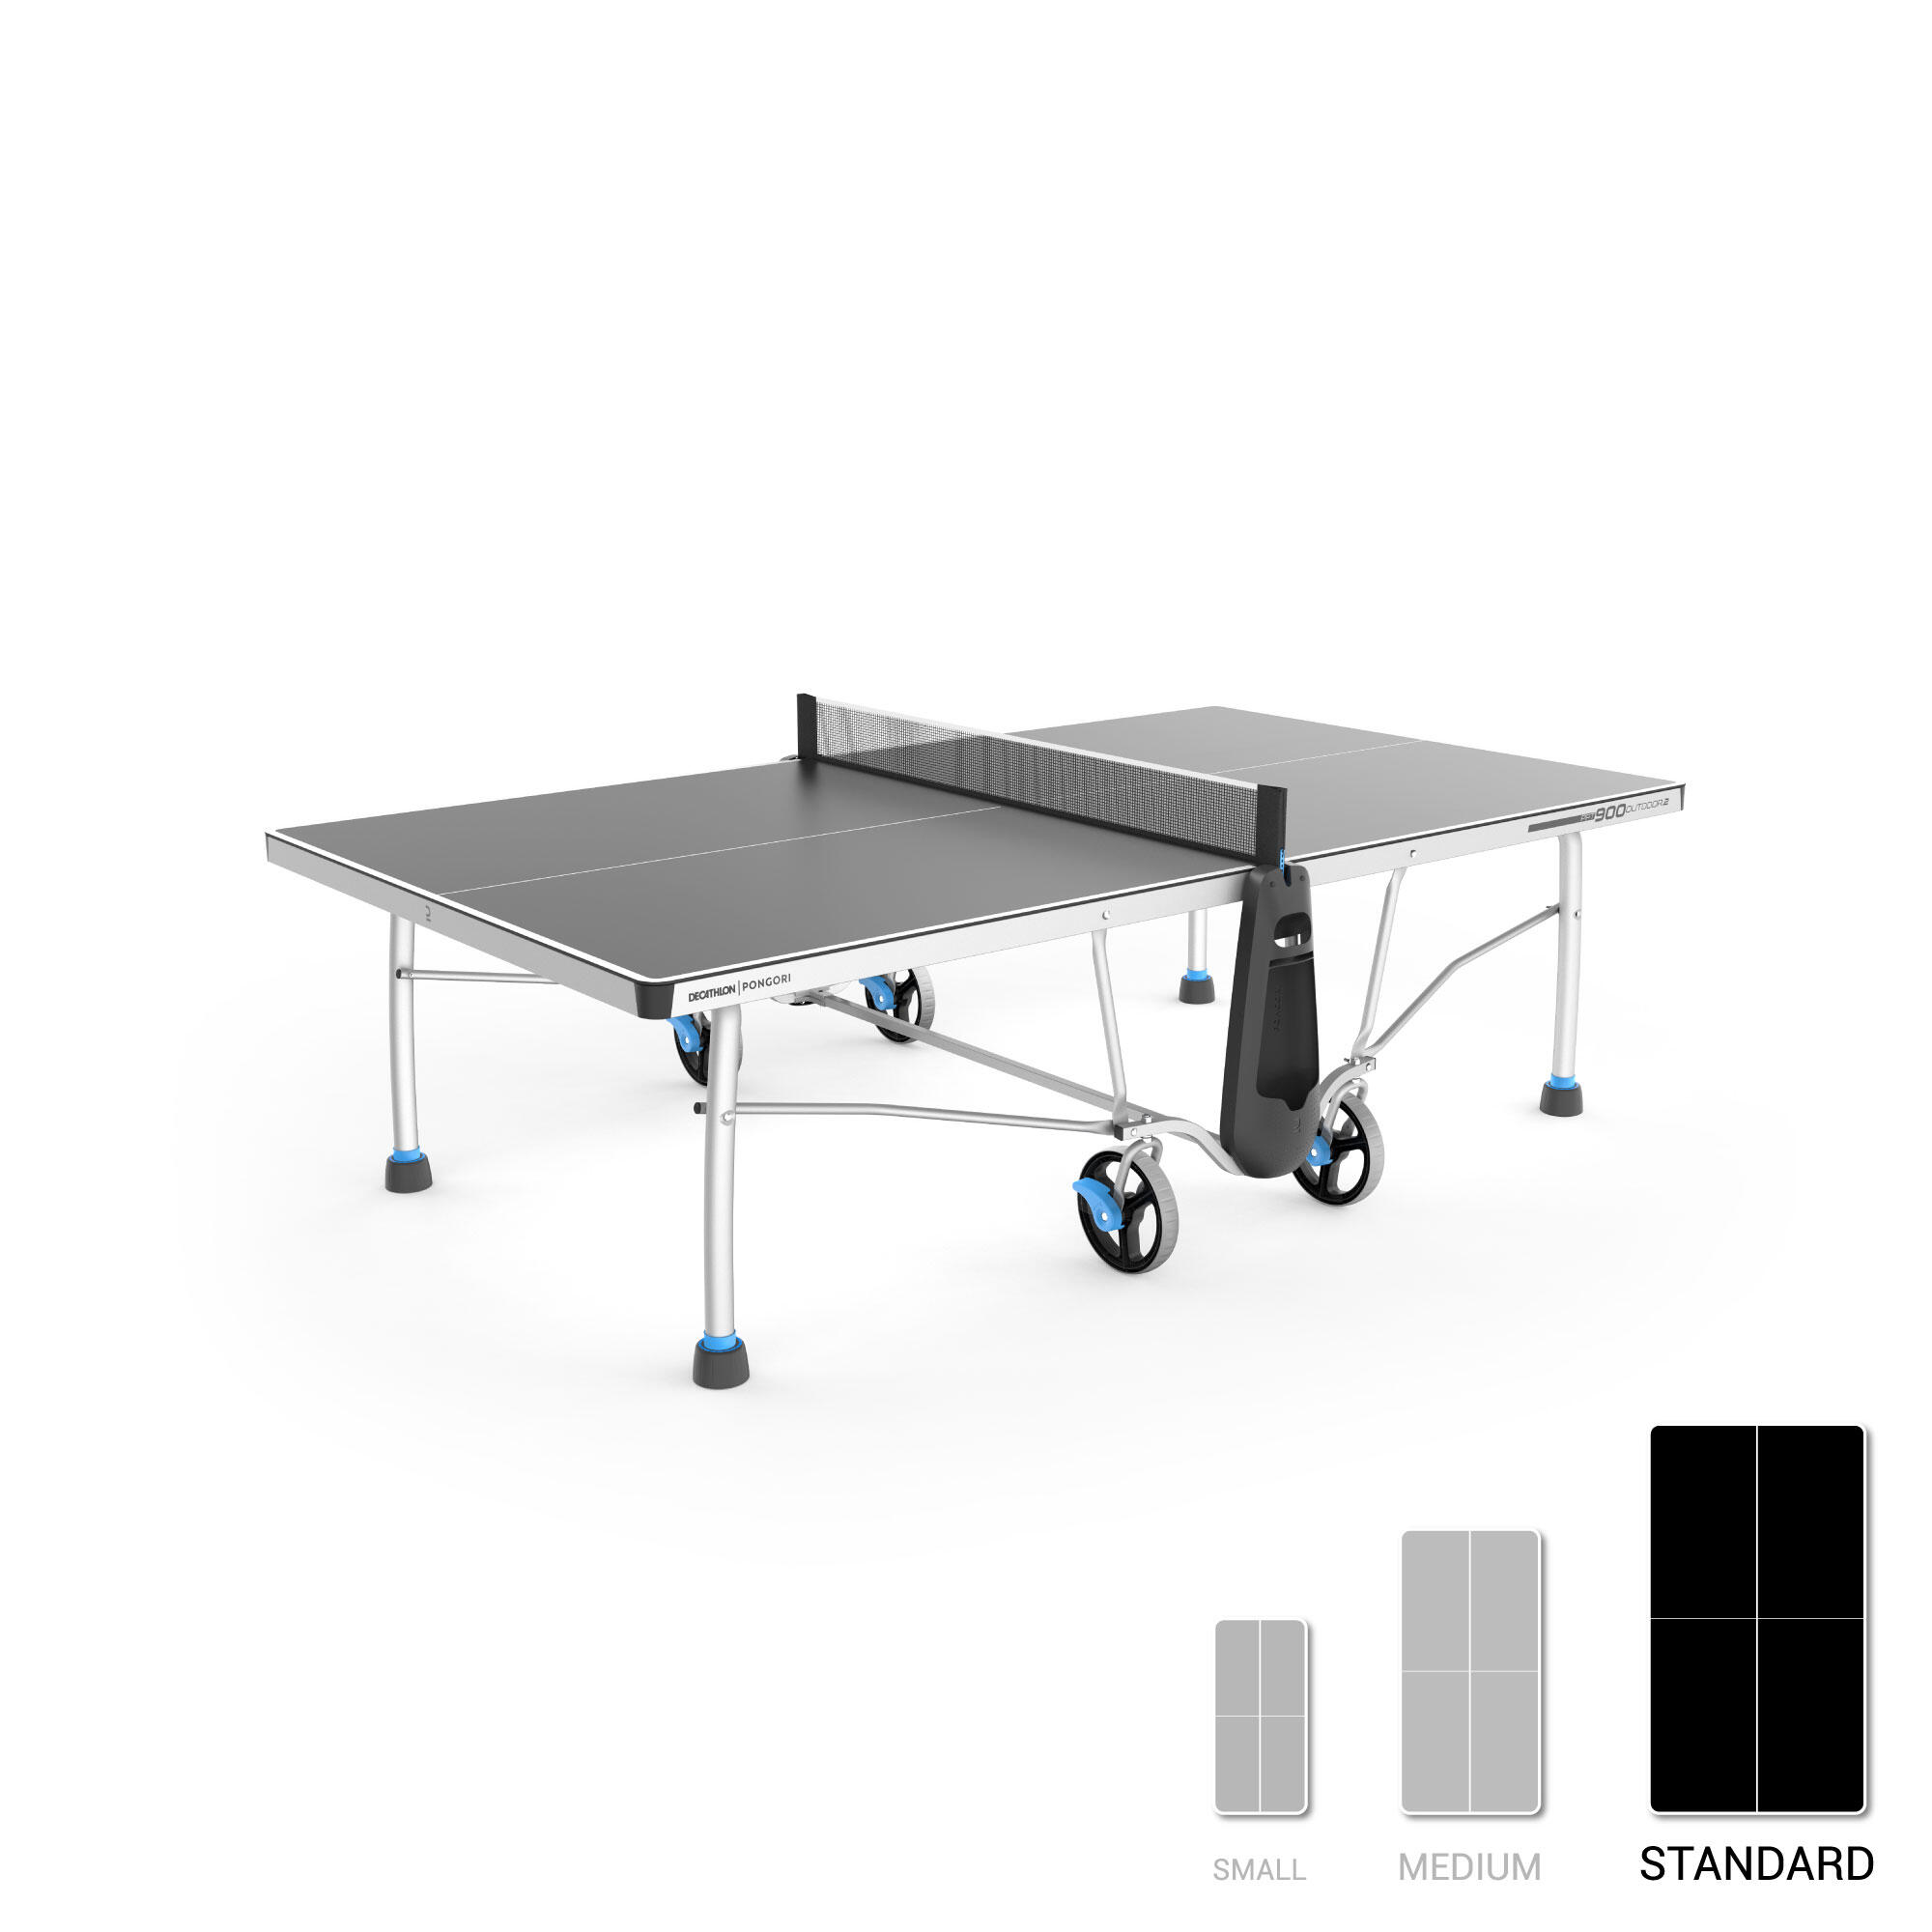 Outdoor Table Tennis Table PPT 900.2 - Grey 4/15